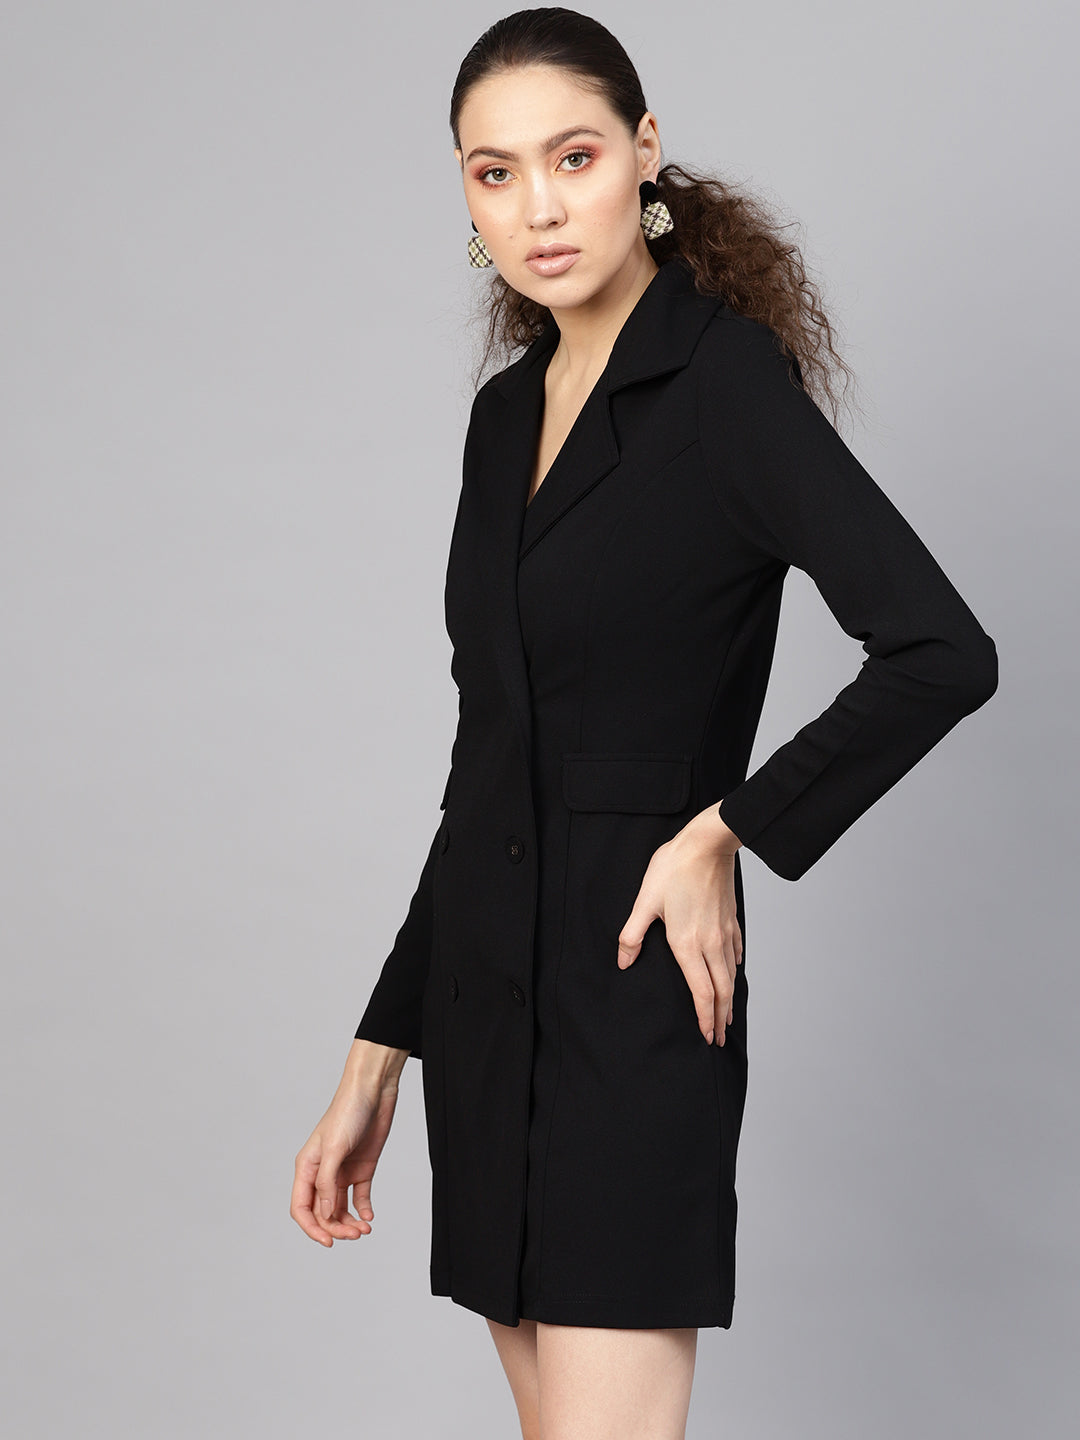 Miximx Blazer Dress for Women Solid Color Double Breasted India | Ubuy